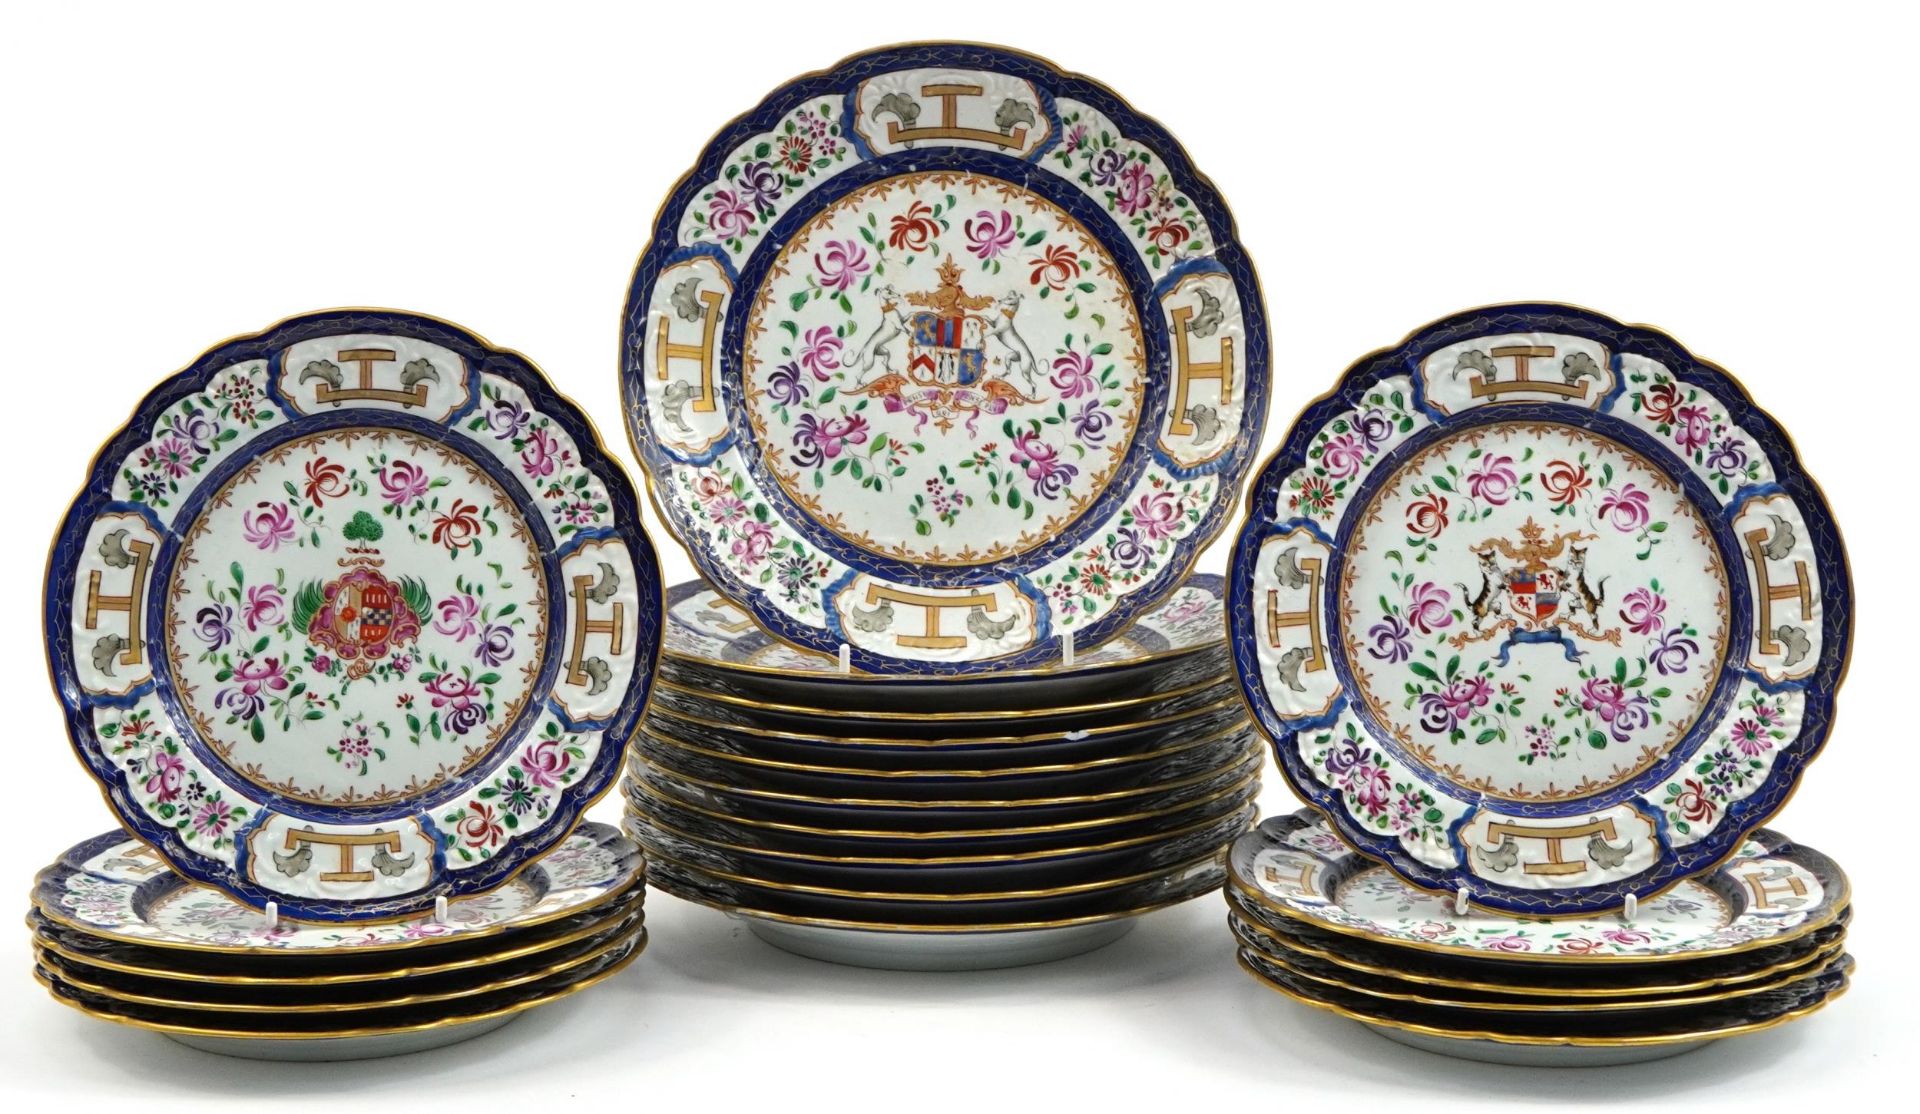 Samson, two sets of ten French Paris porcelain plates hand painted with armorial crests and flowers,